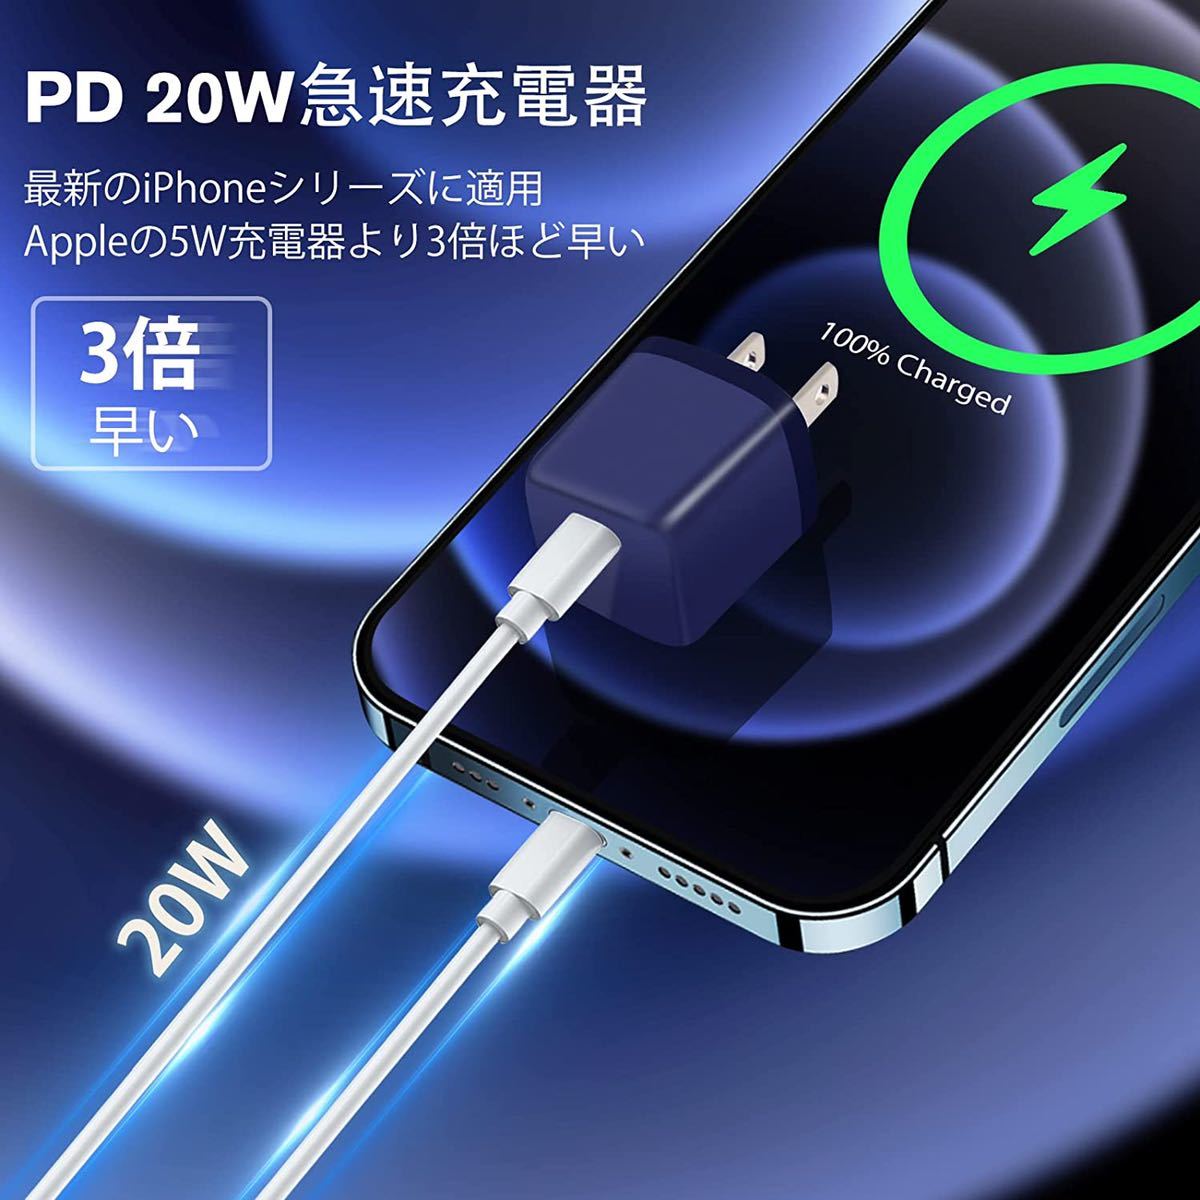 iphone charger type-c 20W pd charger microminiature fast charger 